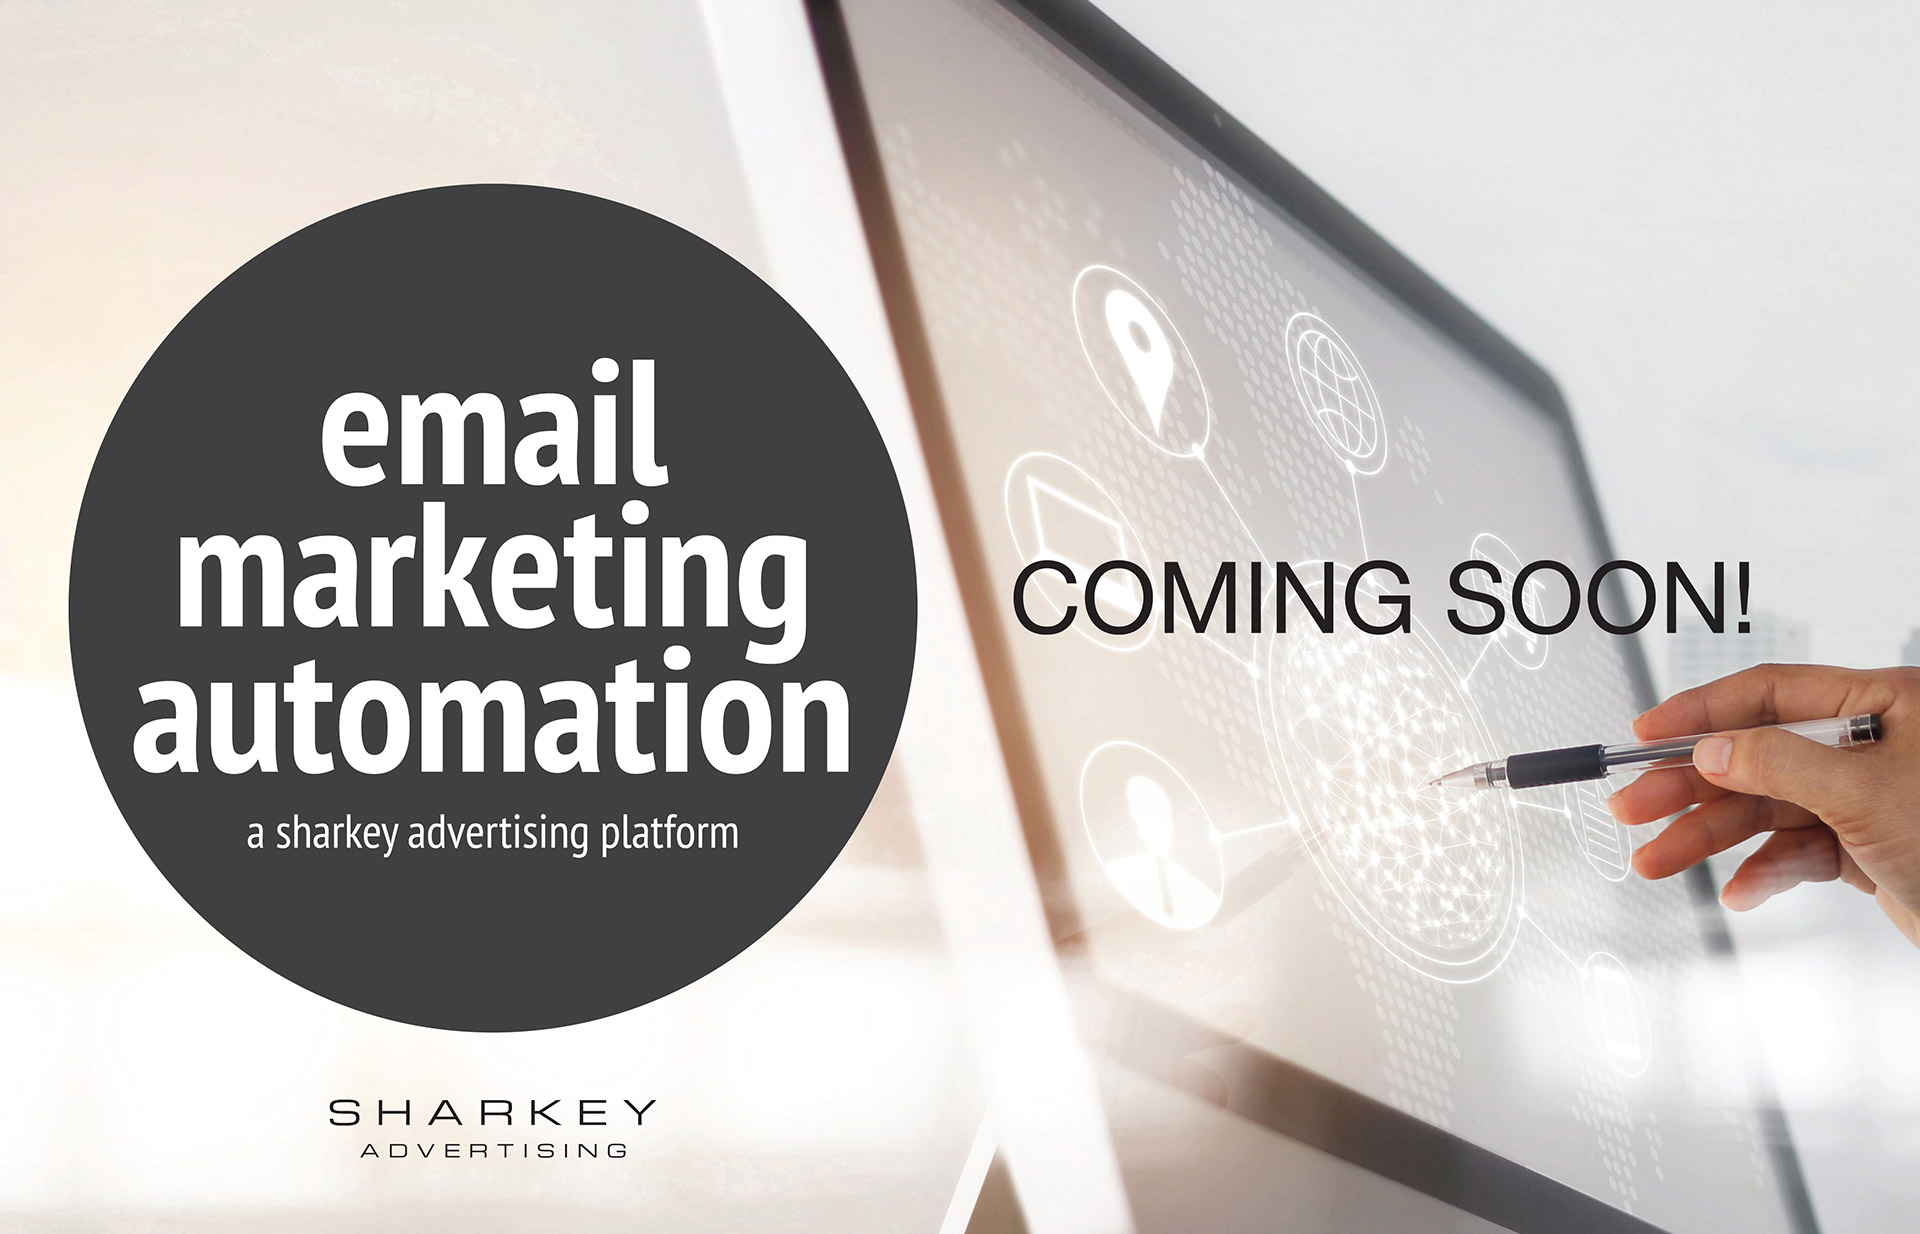 EMAIL MARKETING AUTOMATION